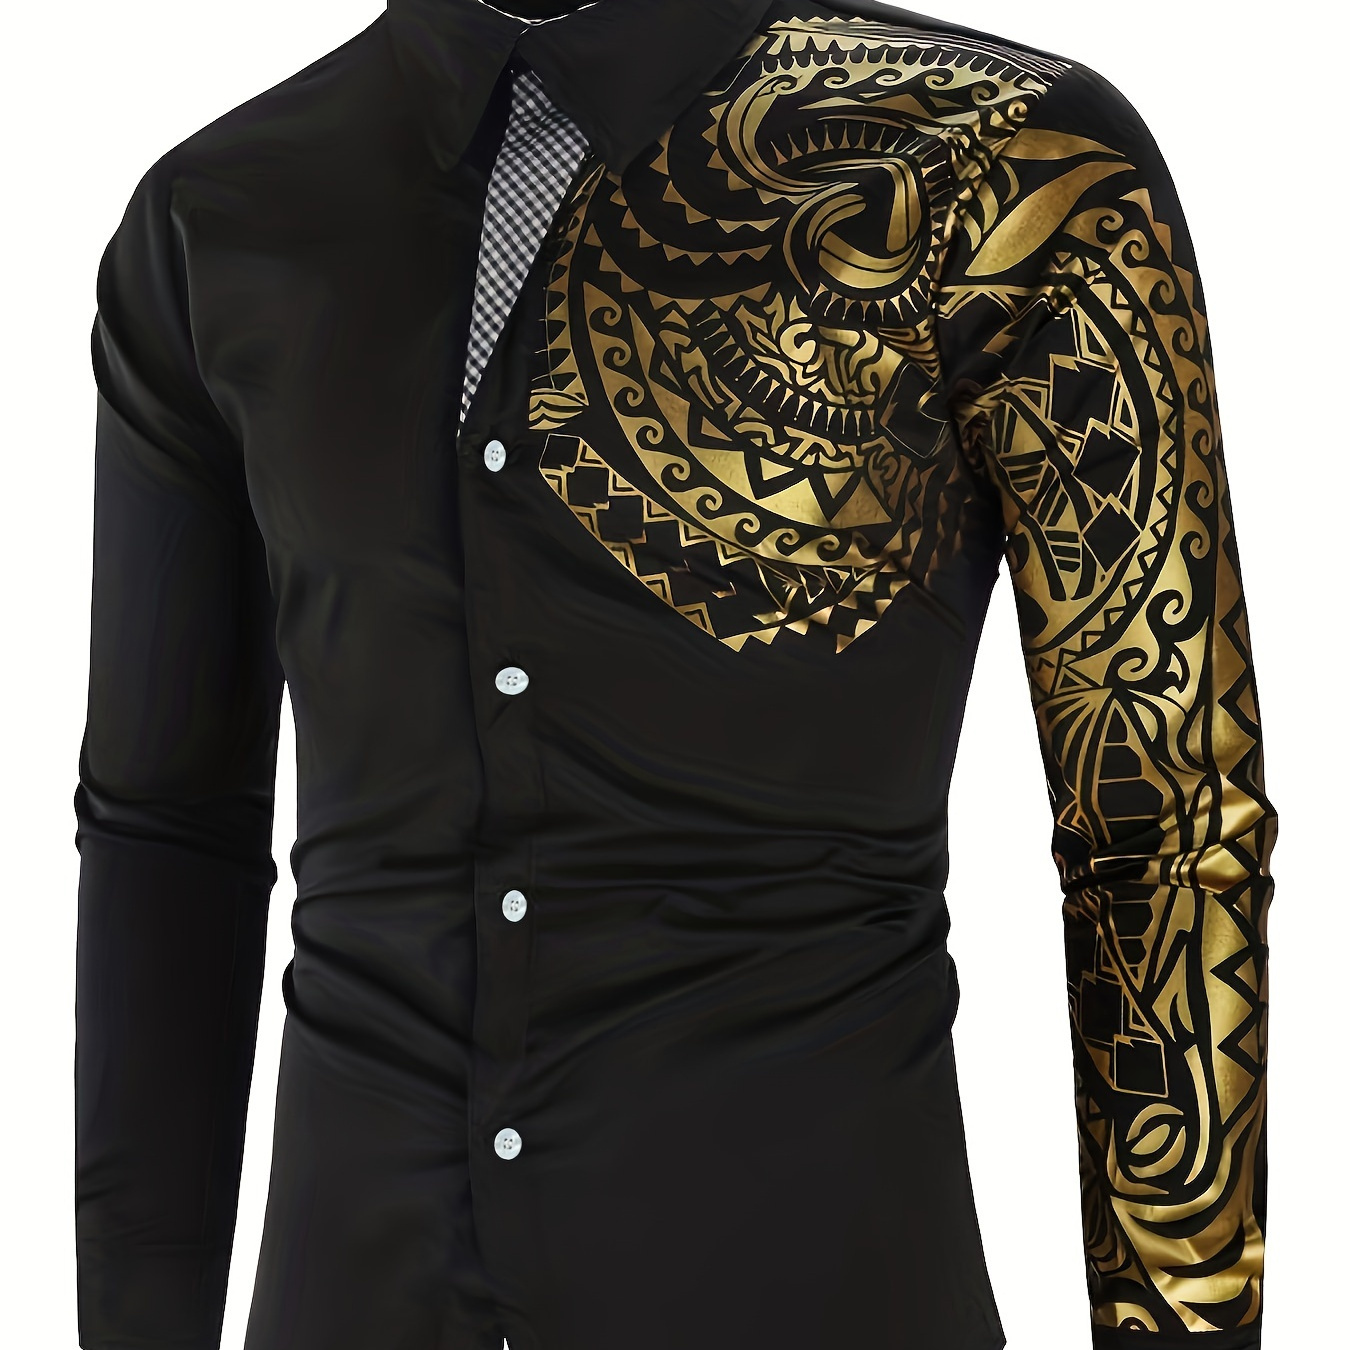 

Men's Casual Long Sleeve Fashionable Gold Tribal Pattern Print Shirt, Slim Fit Dress Shirt For Party/evening Out